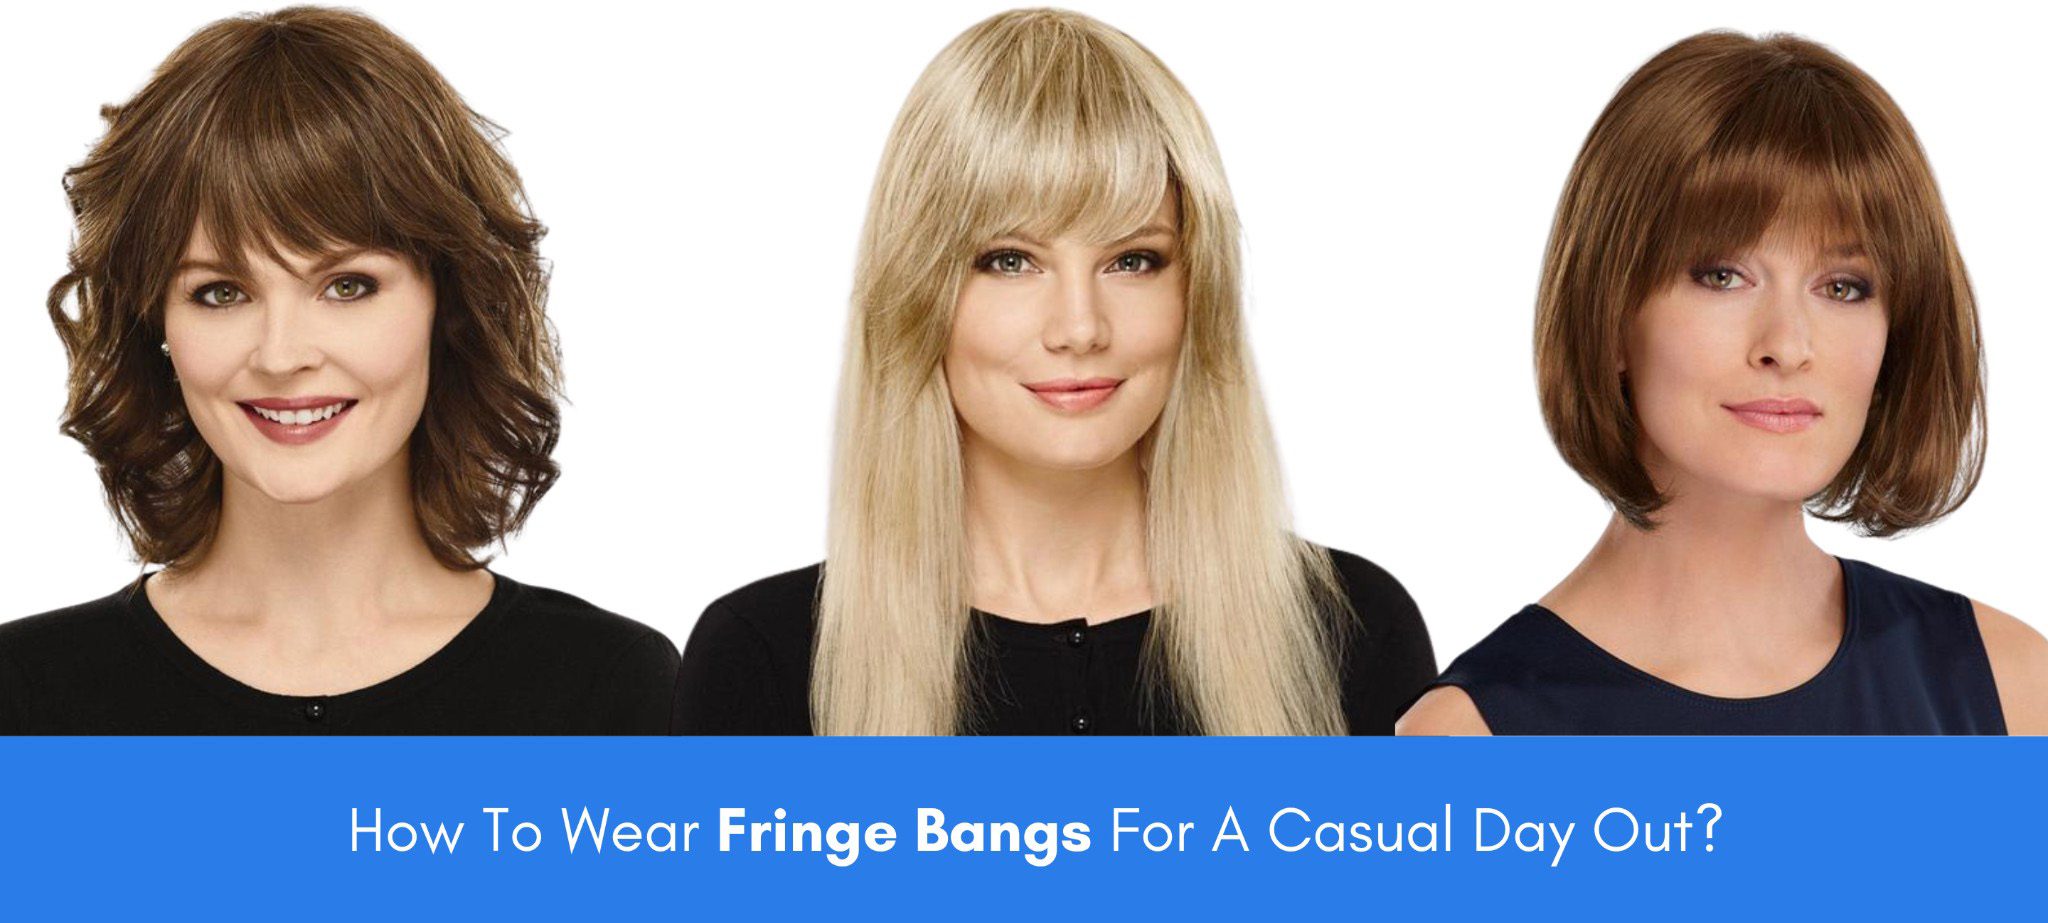 how to wear fringe bangs for a casual day out